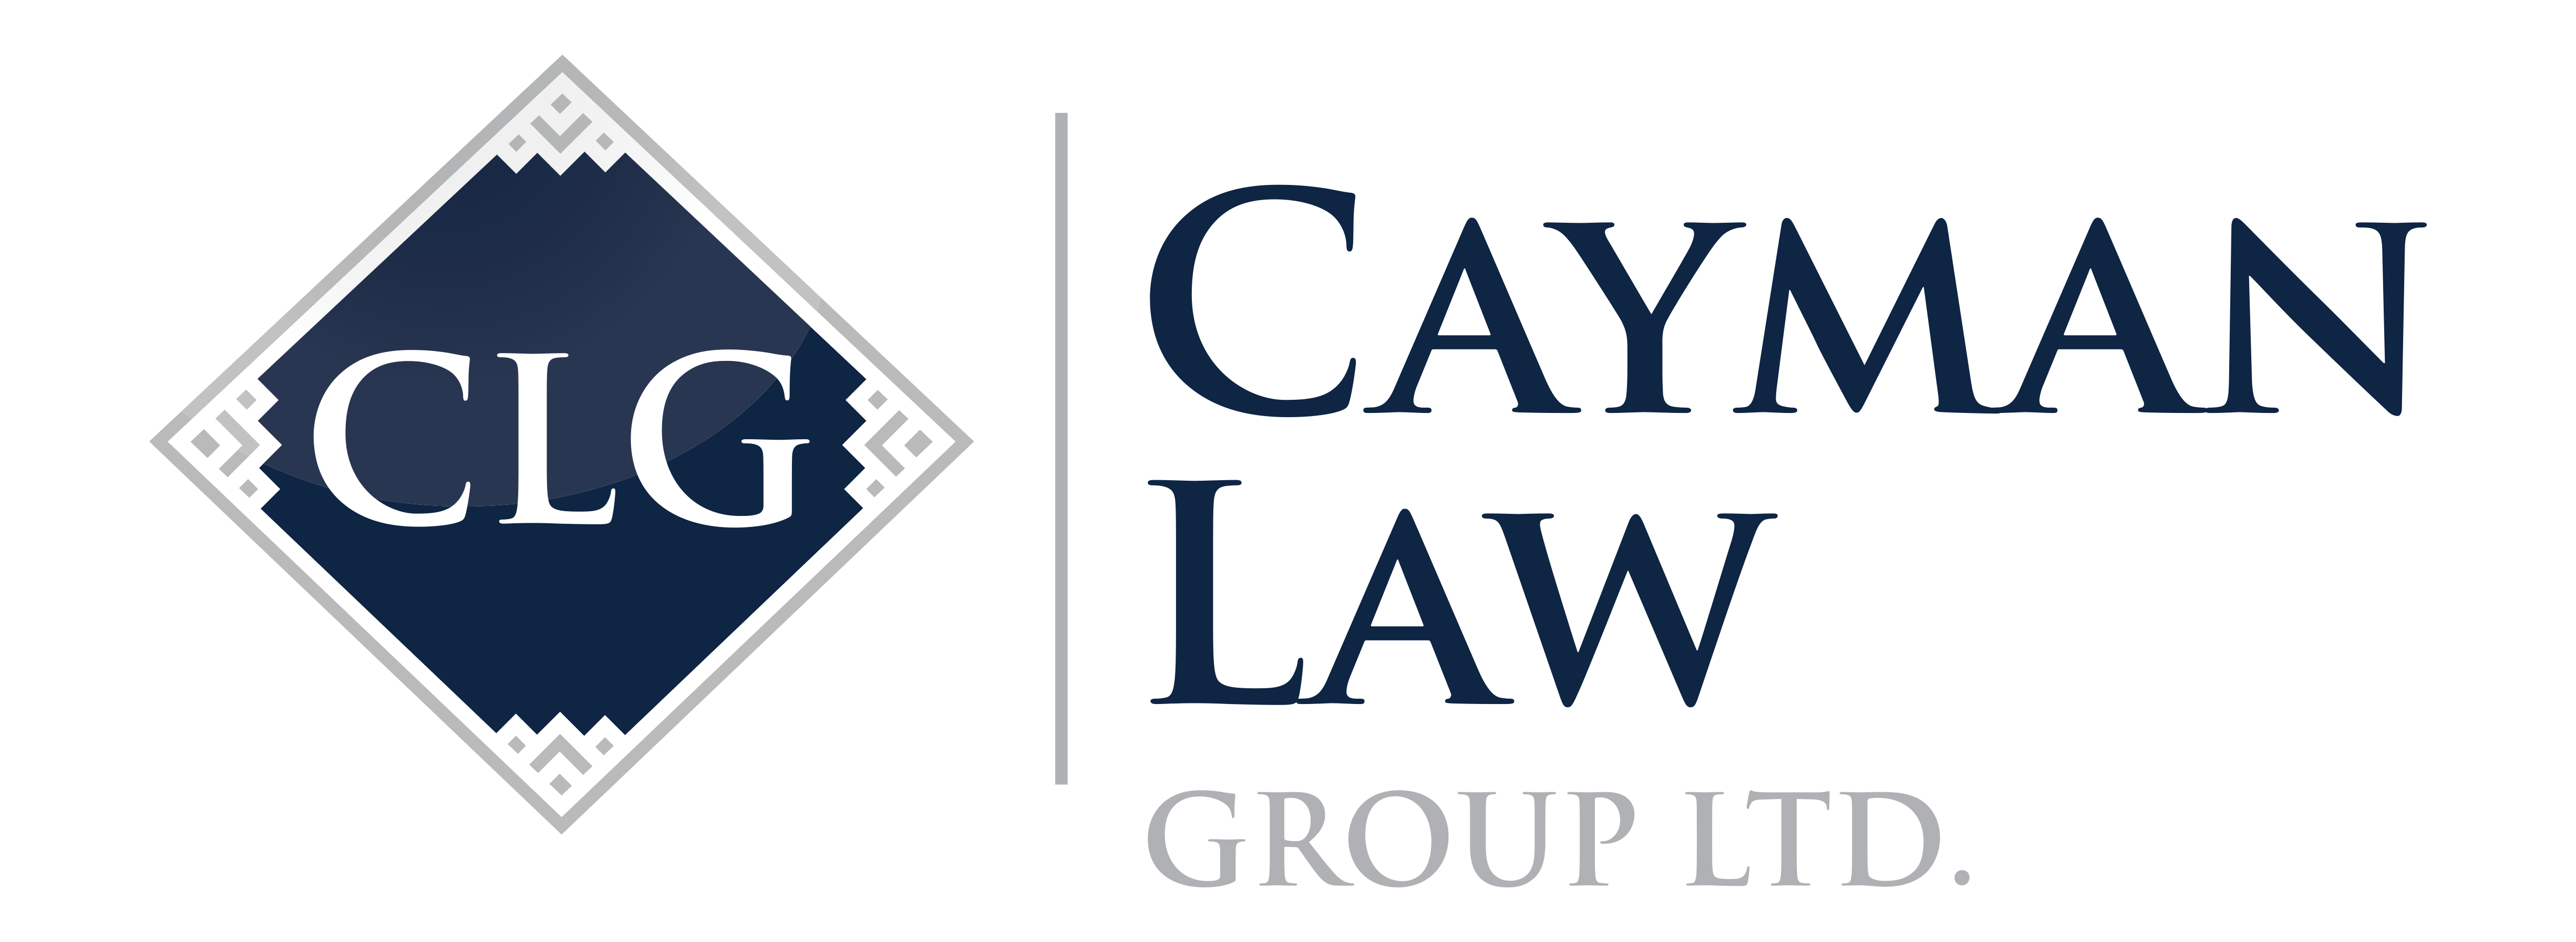 Cayman Law Group